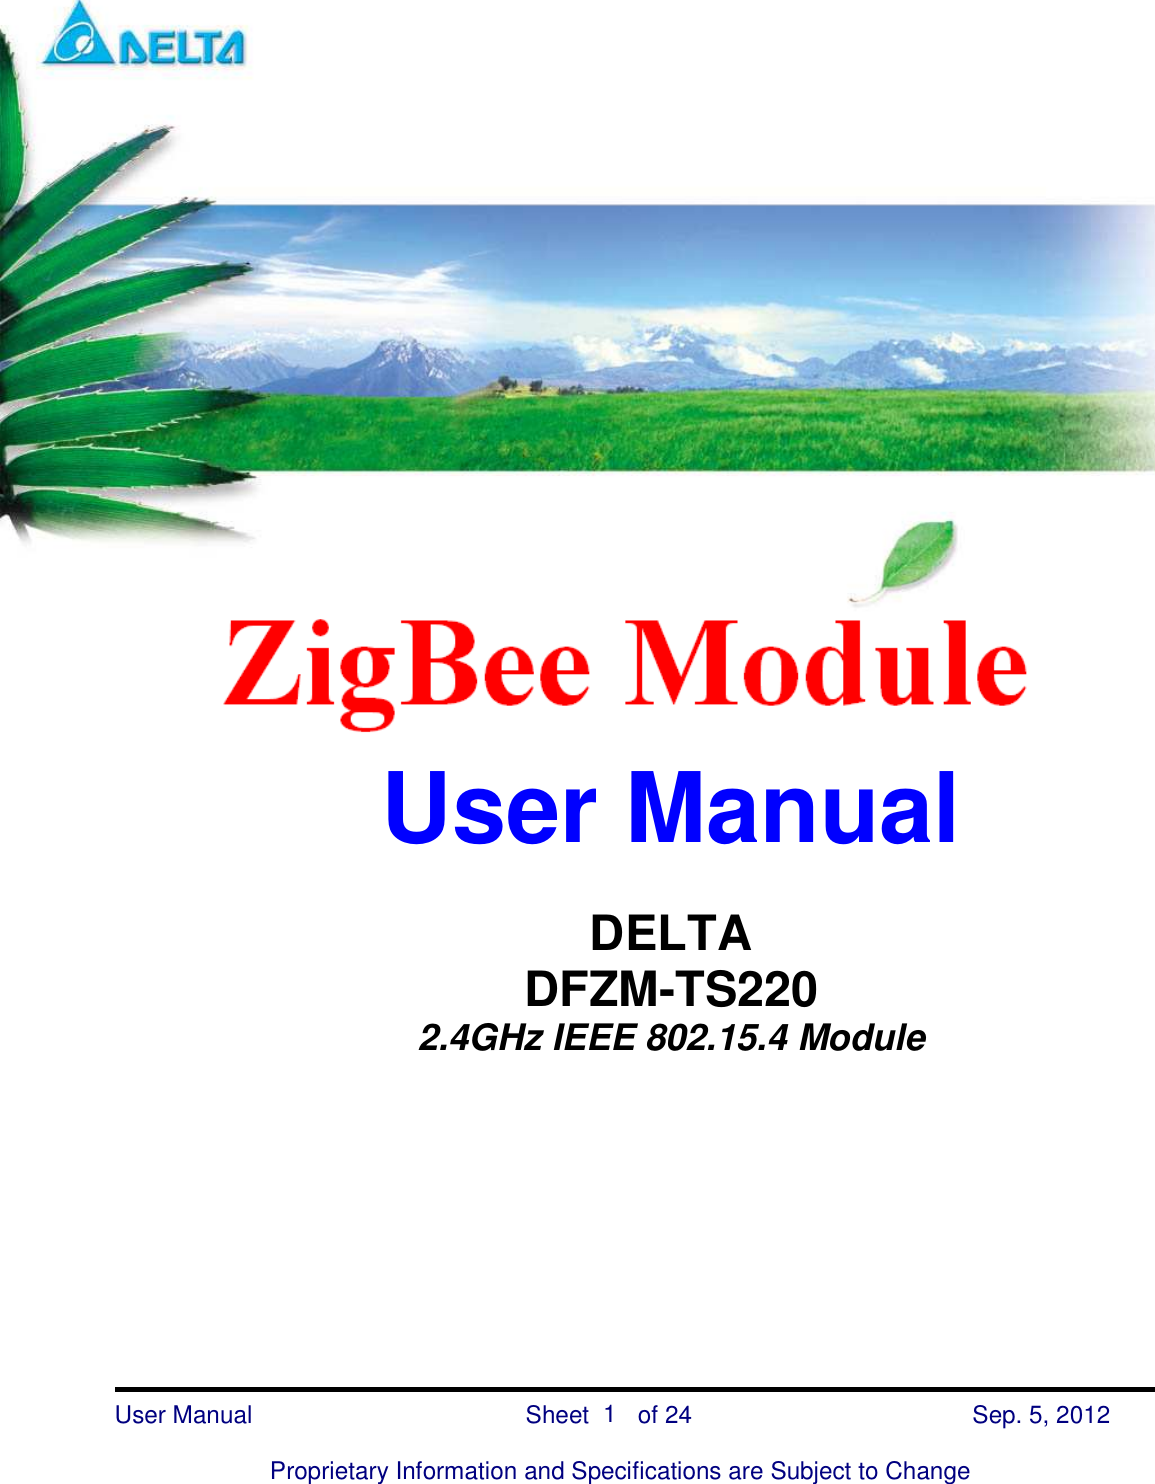    DFZM-TS220    User Manual                            Sheet        of 24      Sep. 5, 2012  Proprietary Information and Specifications are Subject to Change 1               User Manual  DELTA DFZM-TS220 2.4GHz IEEE 802.15.4 Module   